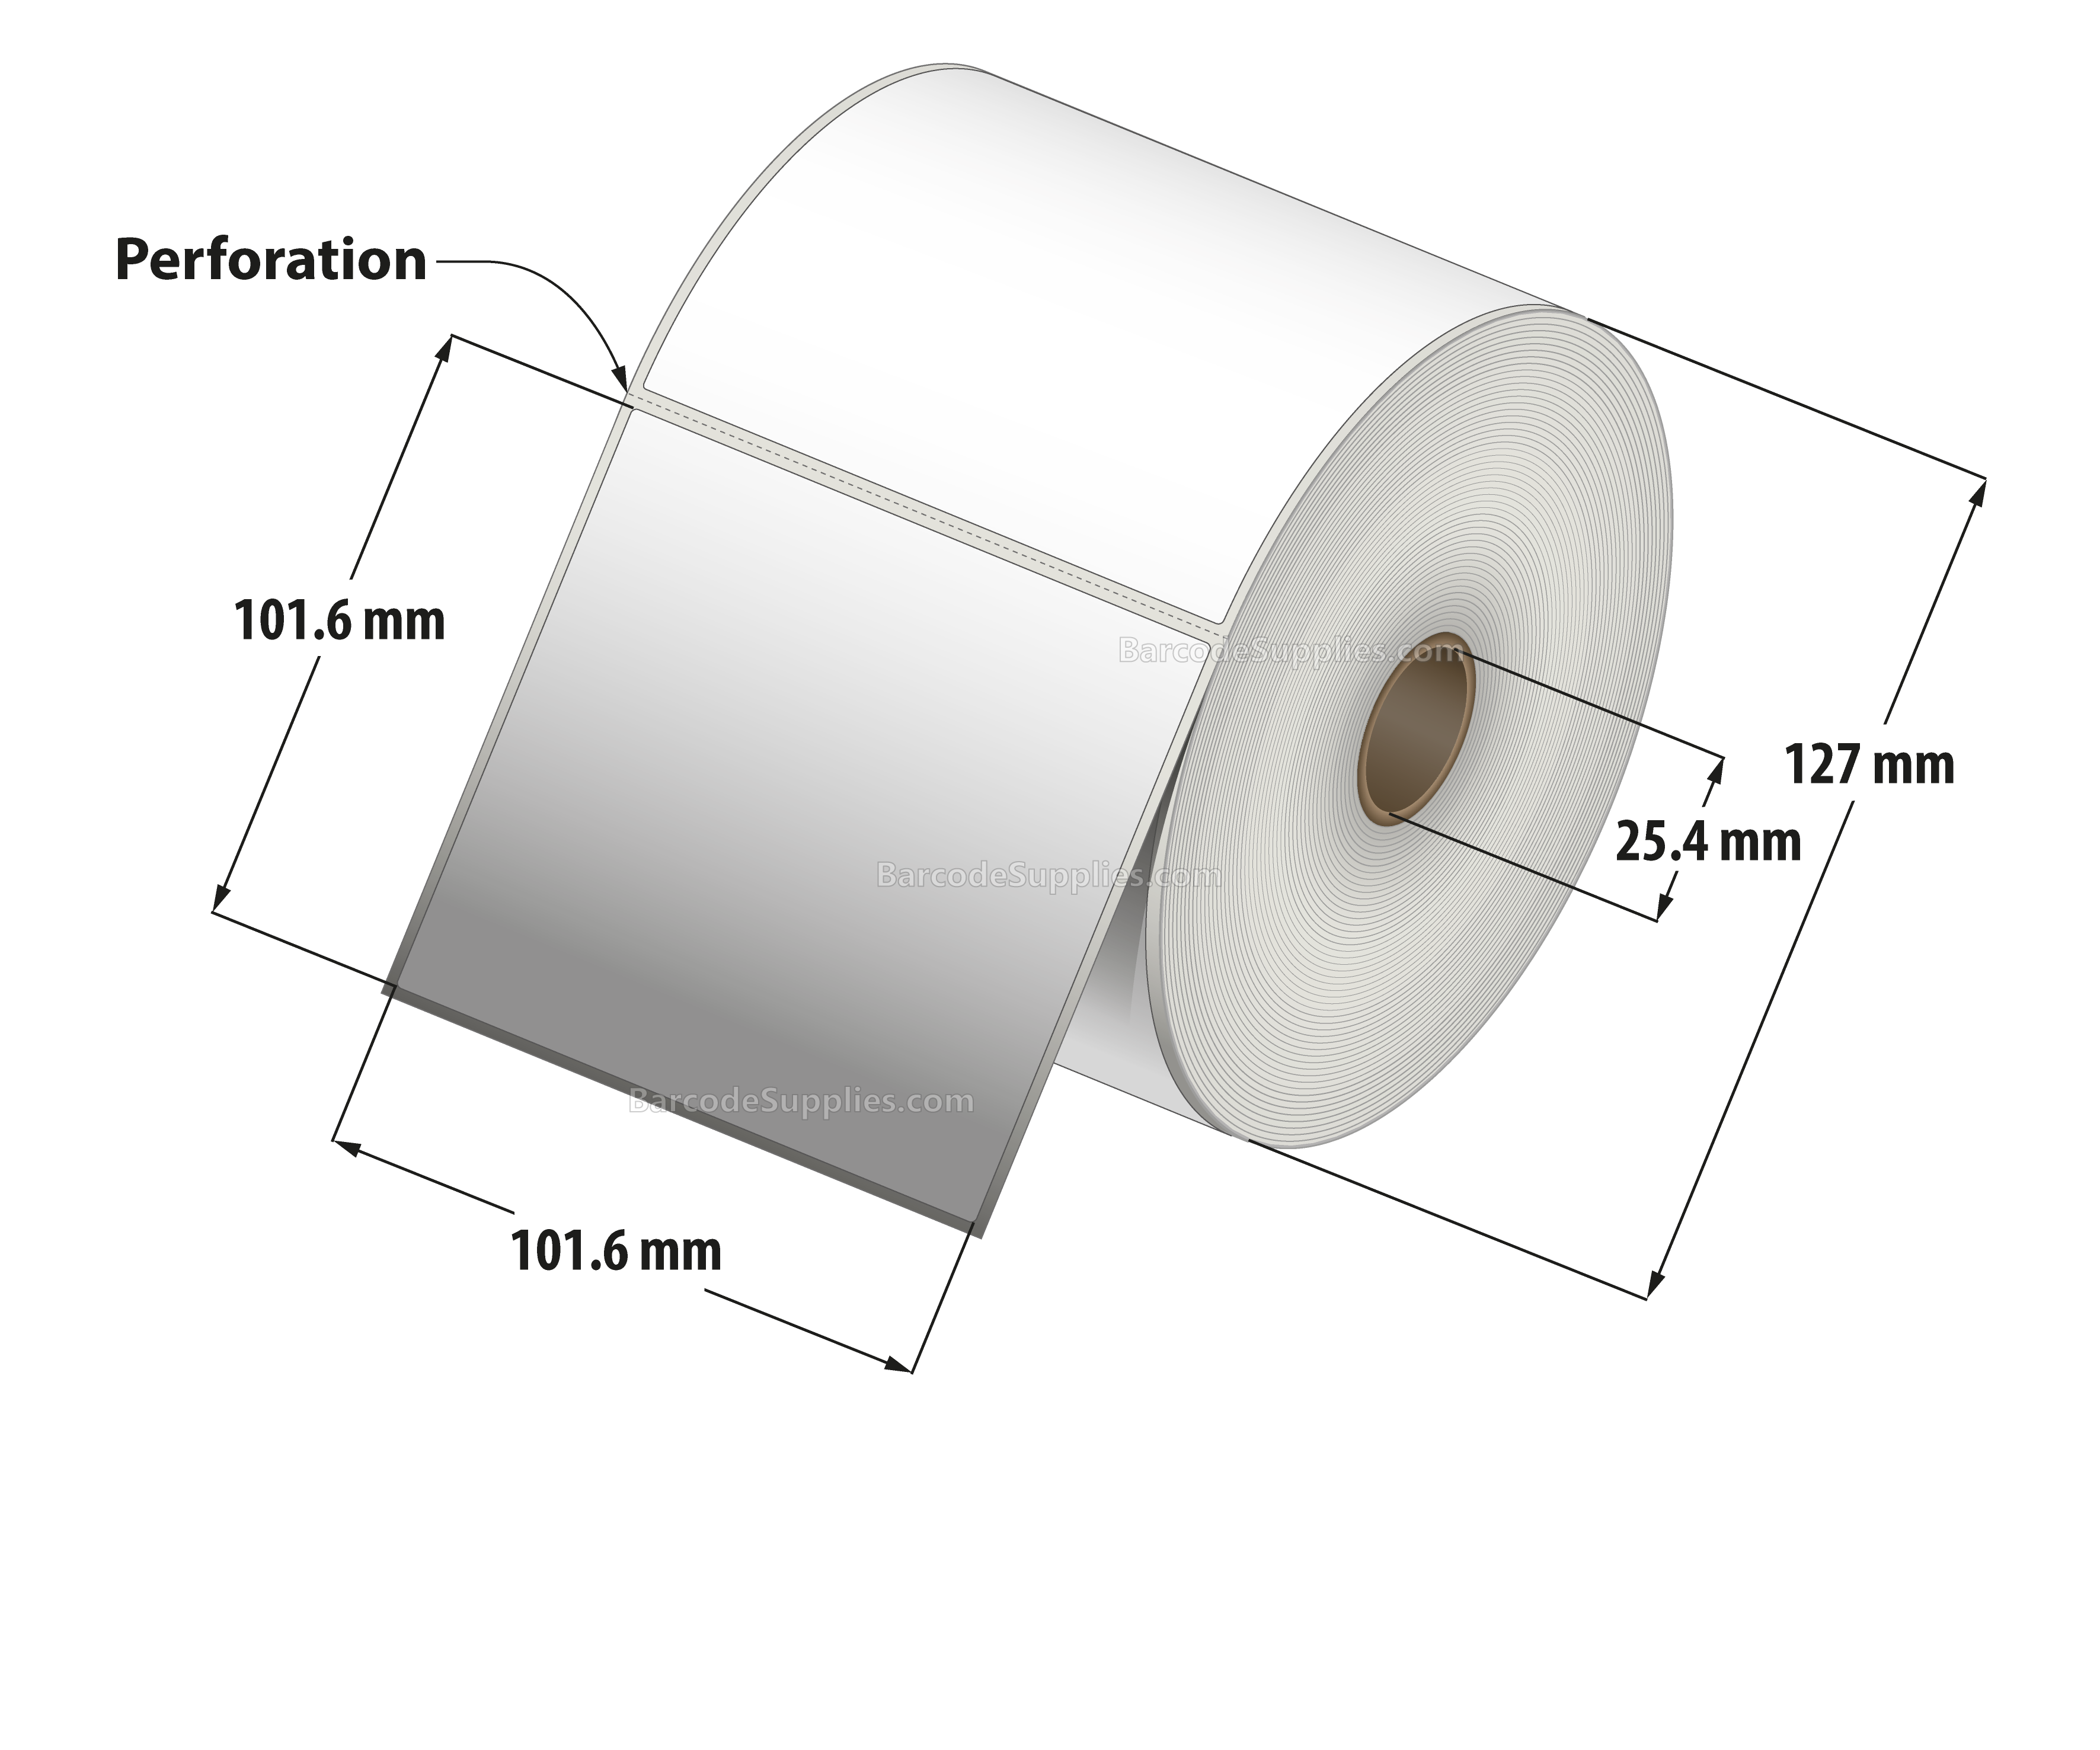 4 x 4 Direct Thermal White Labels With Acrylic Adhesive - Perforated - 700 Labels Per Roll - Carton Of 12 Rolls - 8400 Labels Total - MPN: RD-4-4-700-1 - BarcodeSource, Inc.